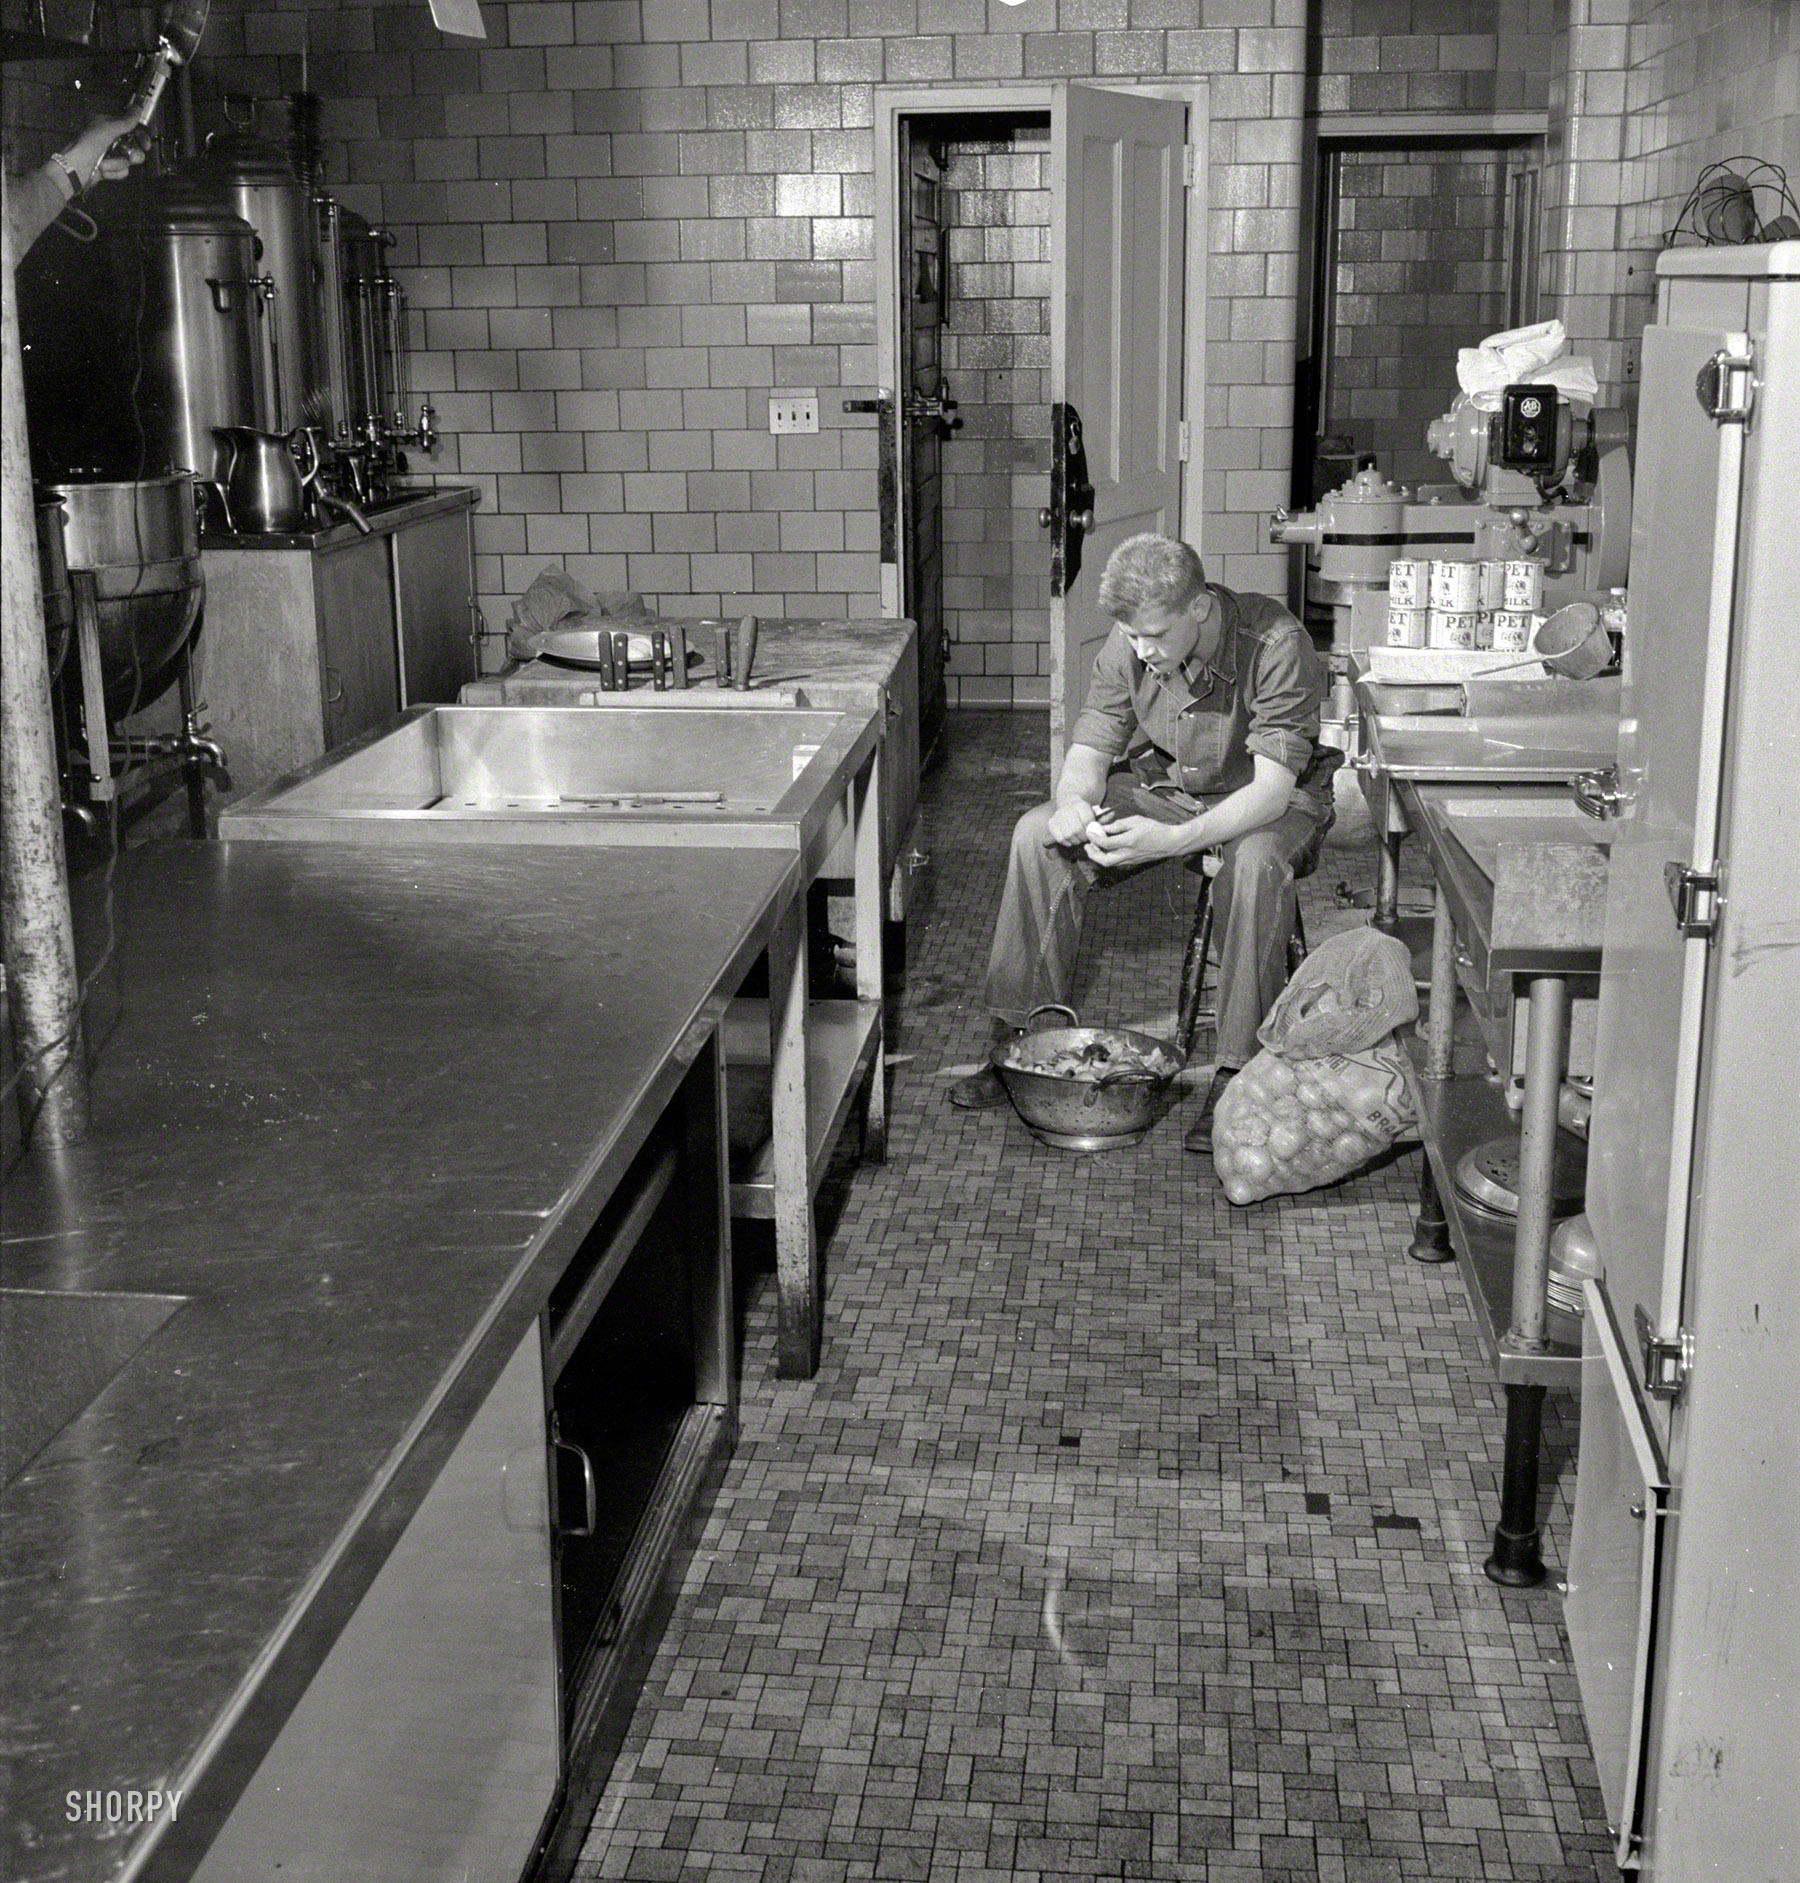 September 1942. Fort Belvoir, Va. "Army Sgt. George Camplair on kitchen police duty." Our first example of the more than 200 photos shot by Jack Delano documenting this soldier's induction, training and home life. View full size.